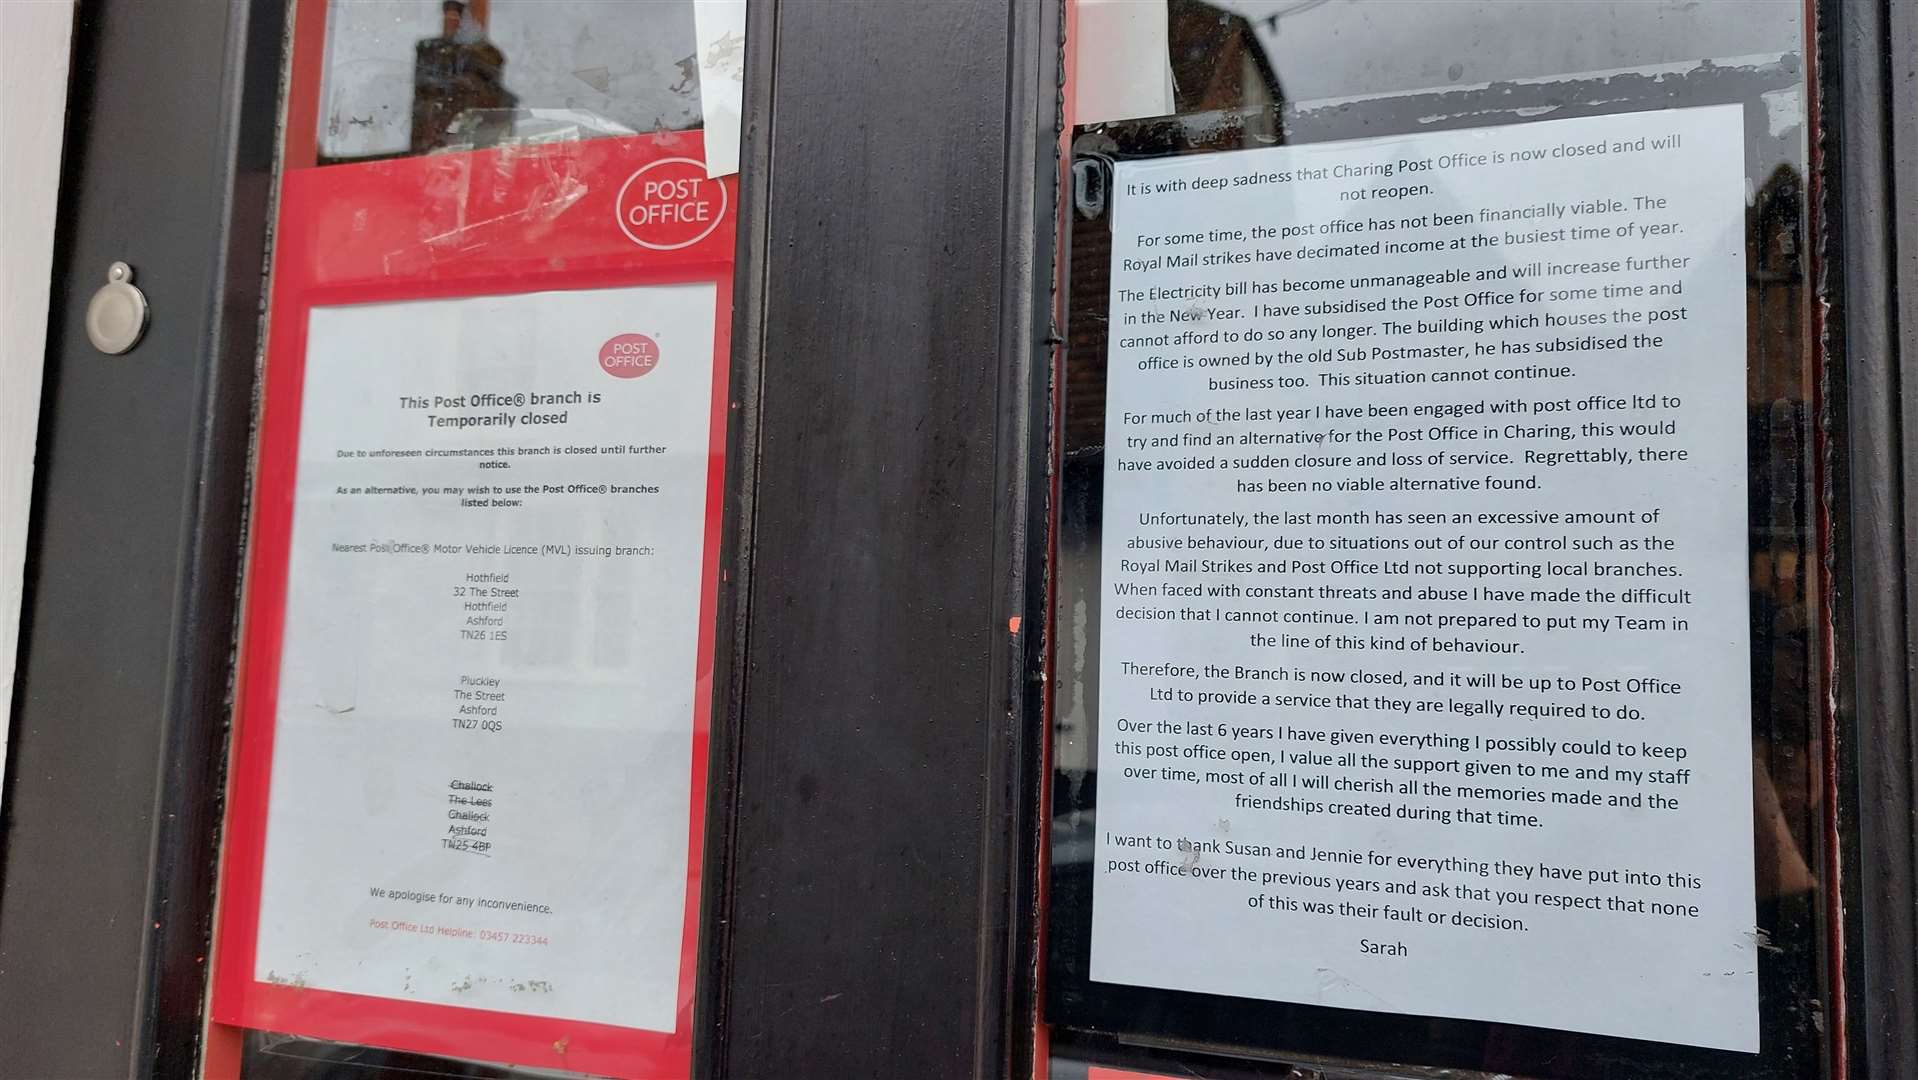 A note appeared in the window explaining the reason for its closure